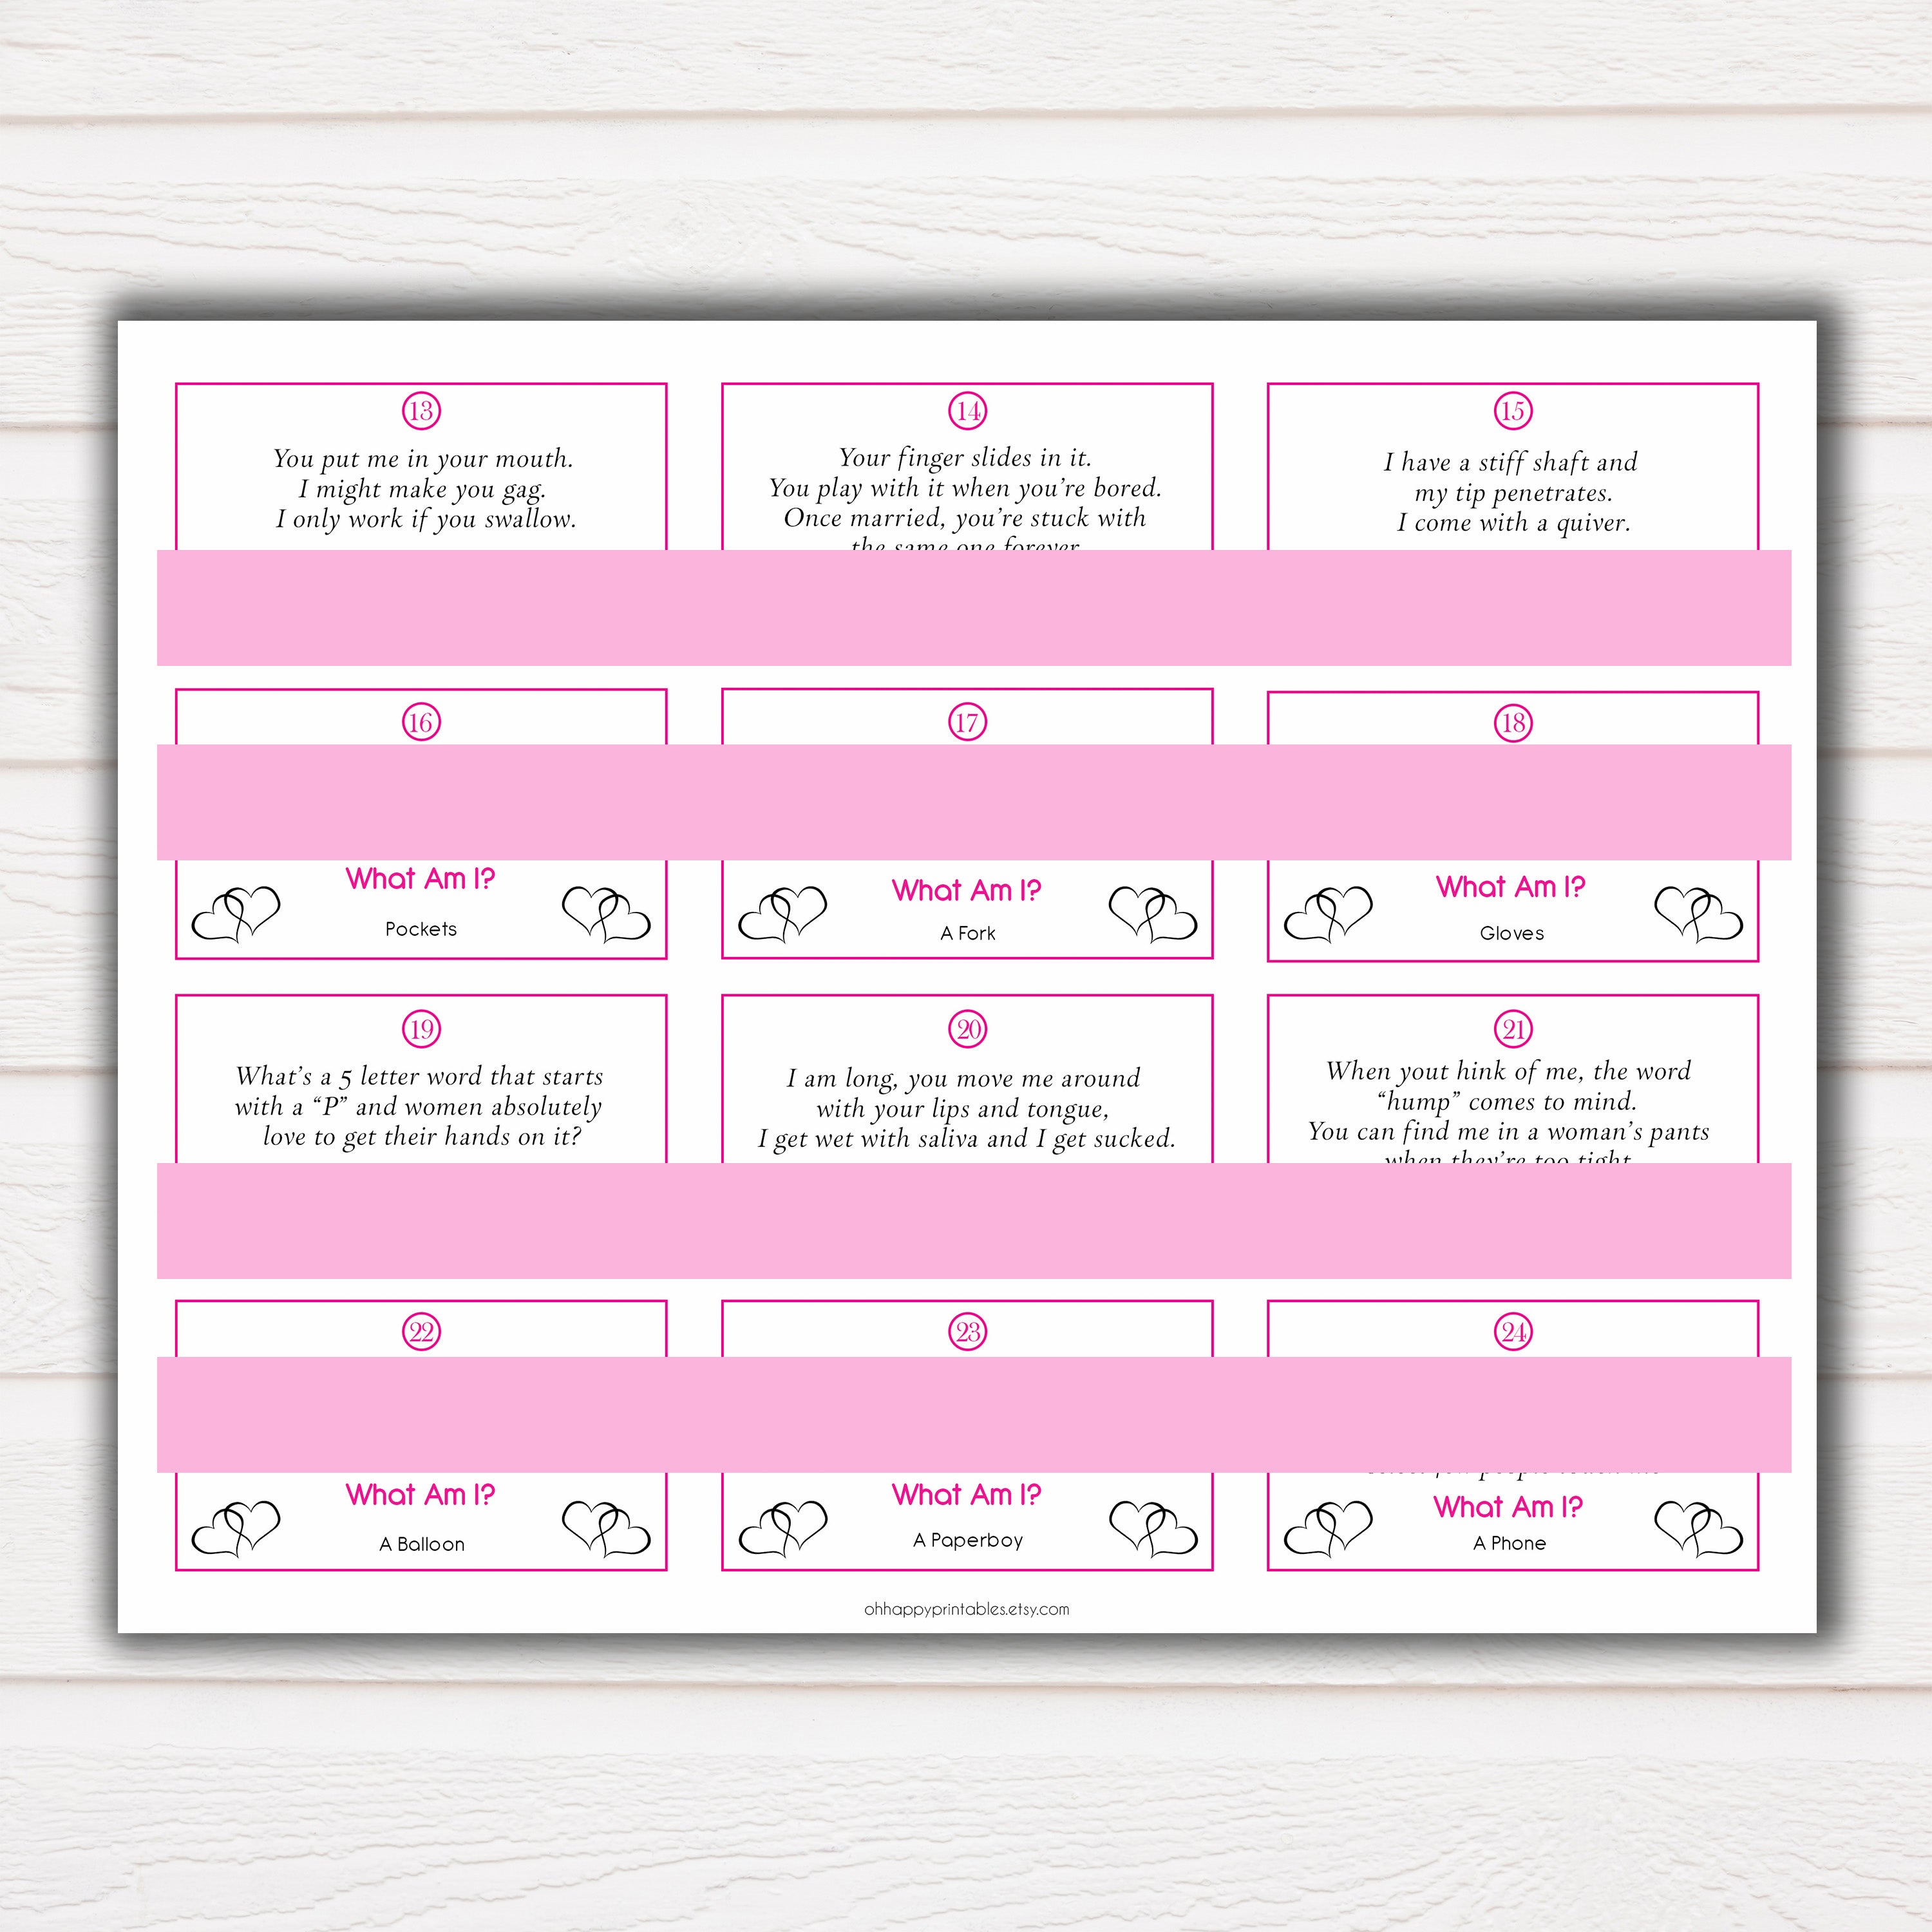 24 What Am I Innuendo Baby Shower Games, Baseball Innuendo Riddle Baby Shower Games, What Am I Games, Baby Games, Adult Baby Shower, printable baby shower games, fun baby shower games, popular baby shower games